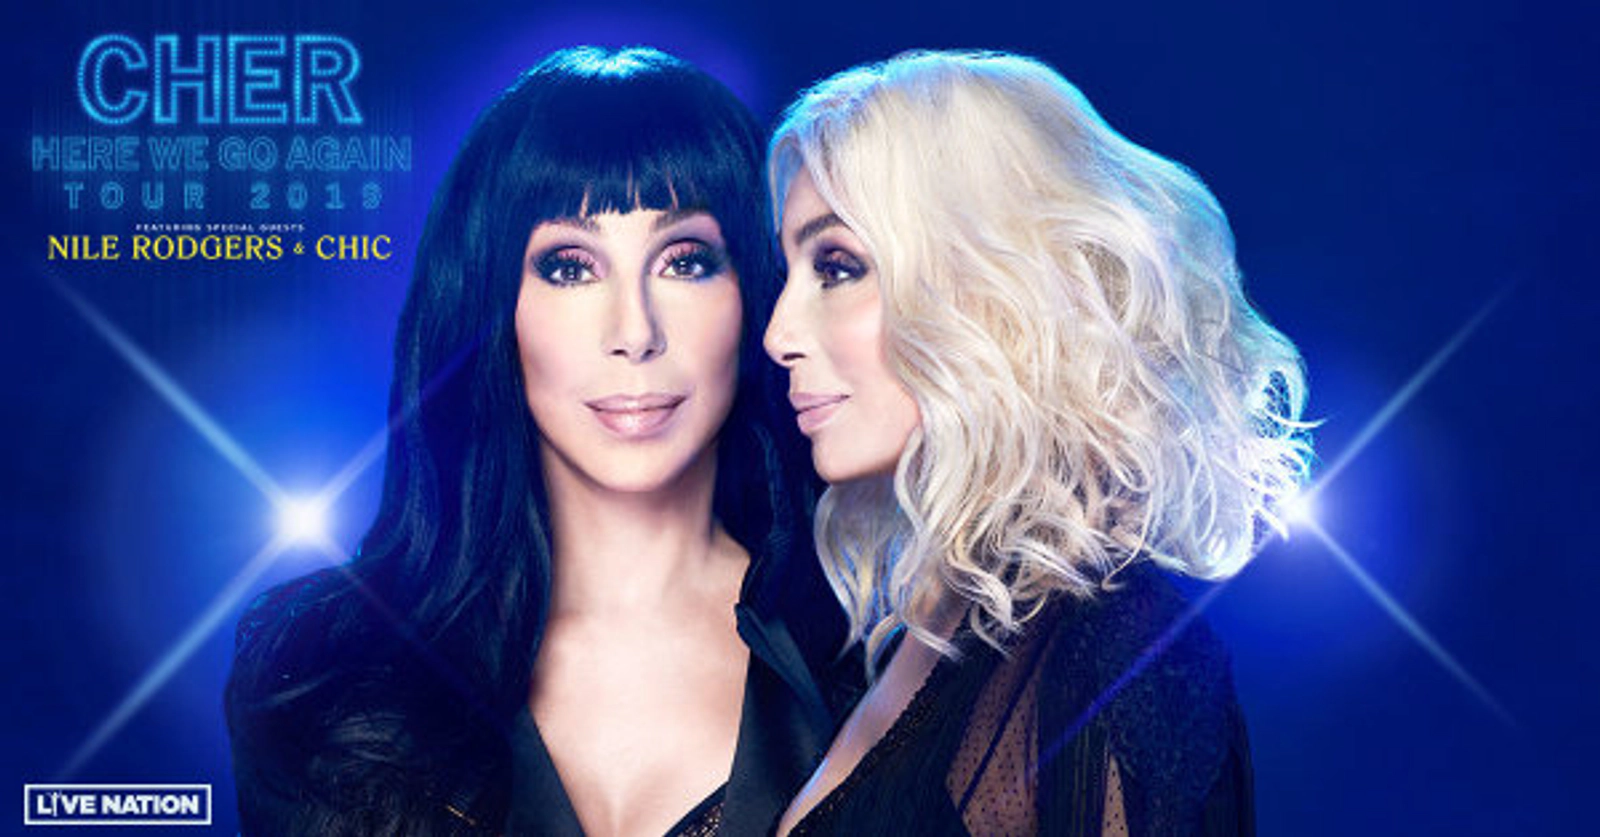  Win your tickets to see CHER in New Orleans!   - Thumbnail Image